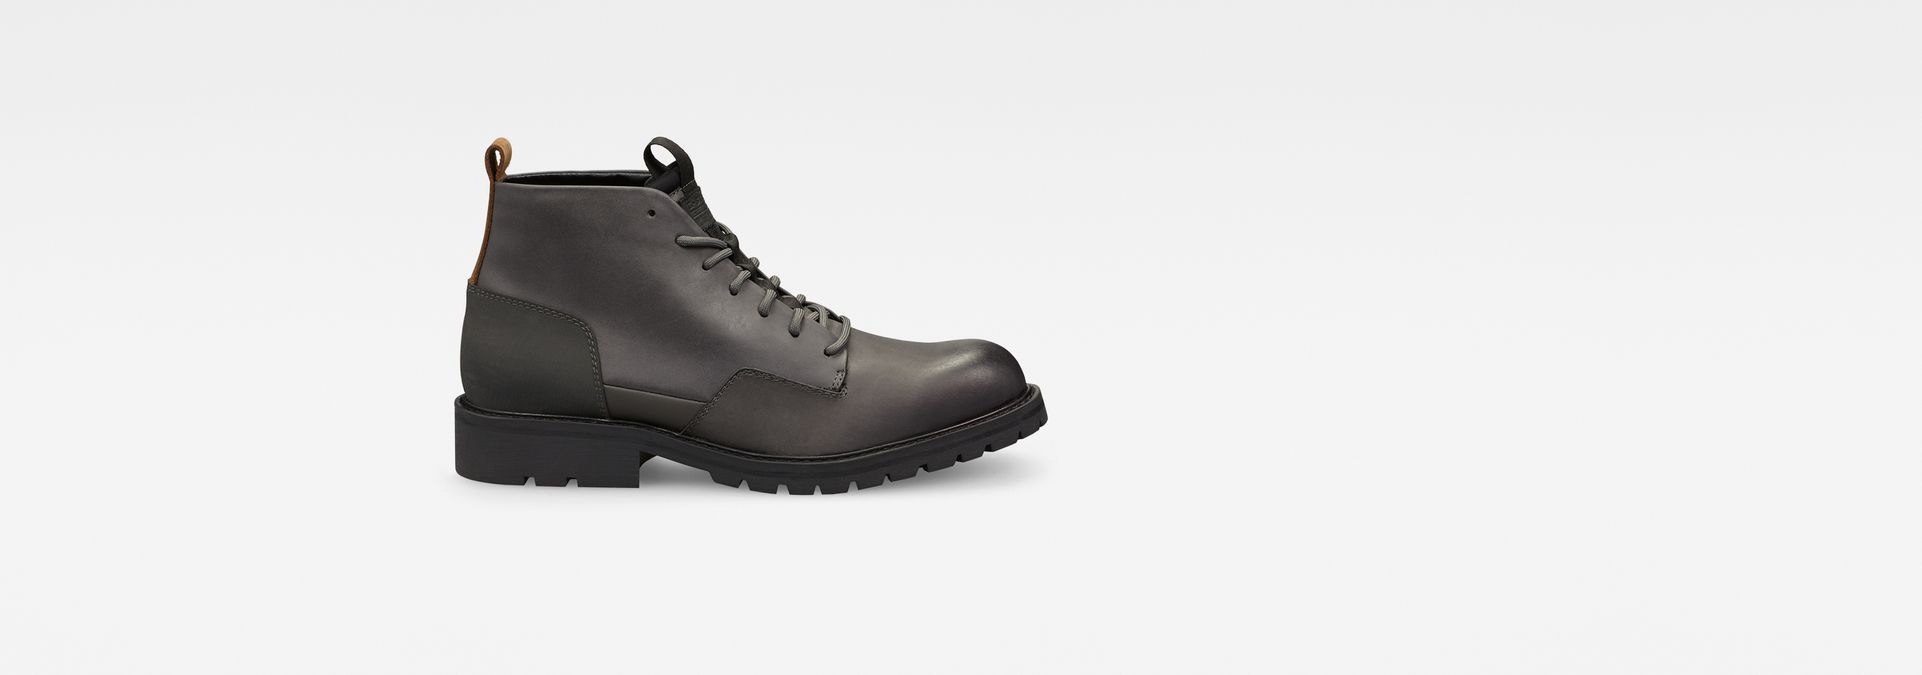 g star core derby boot